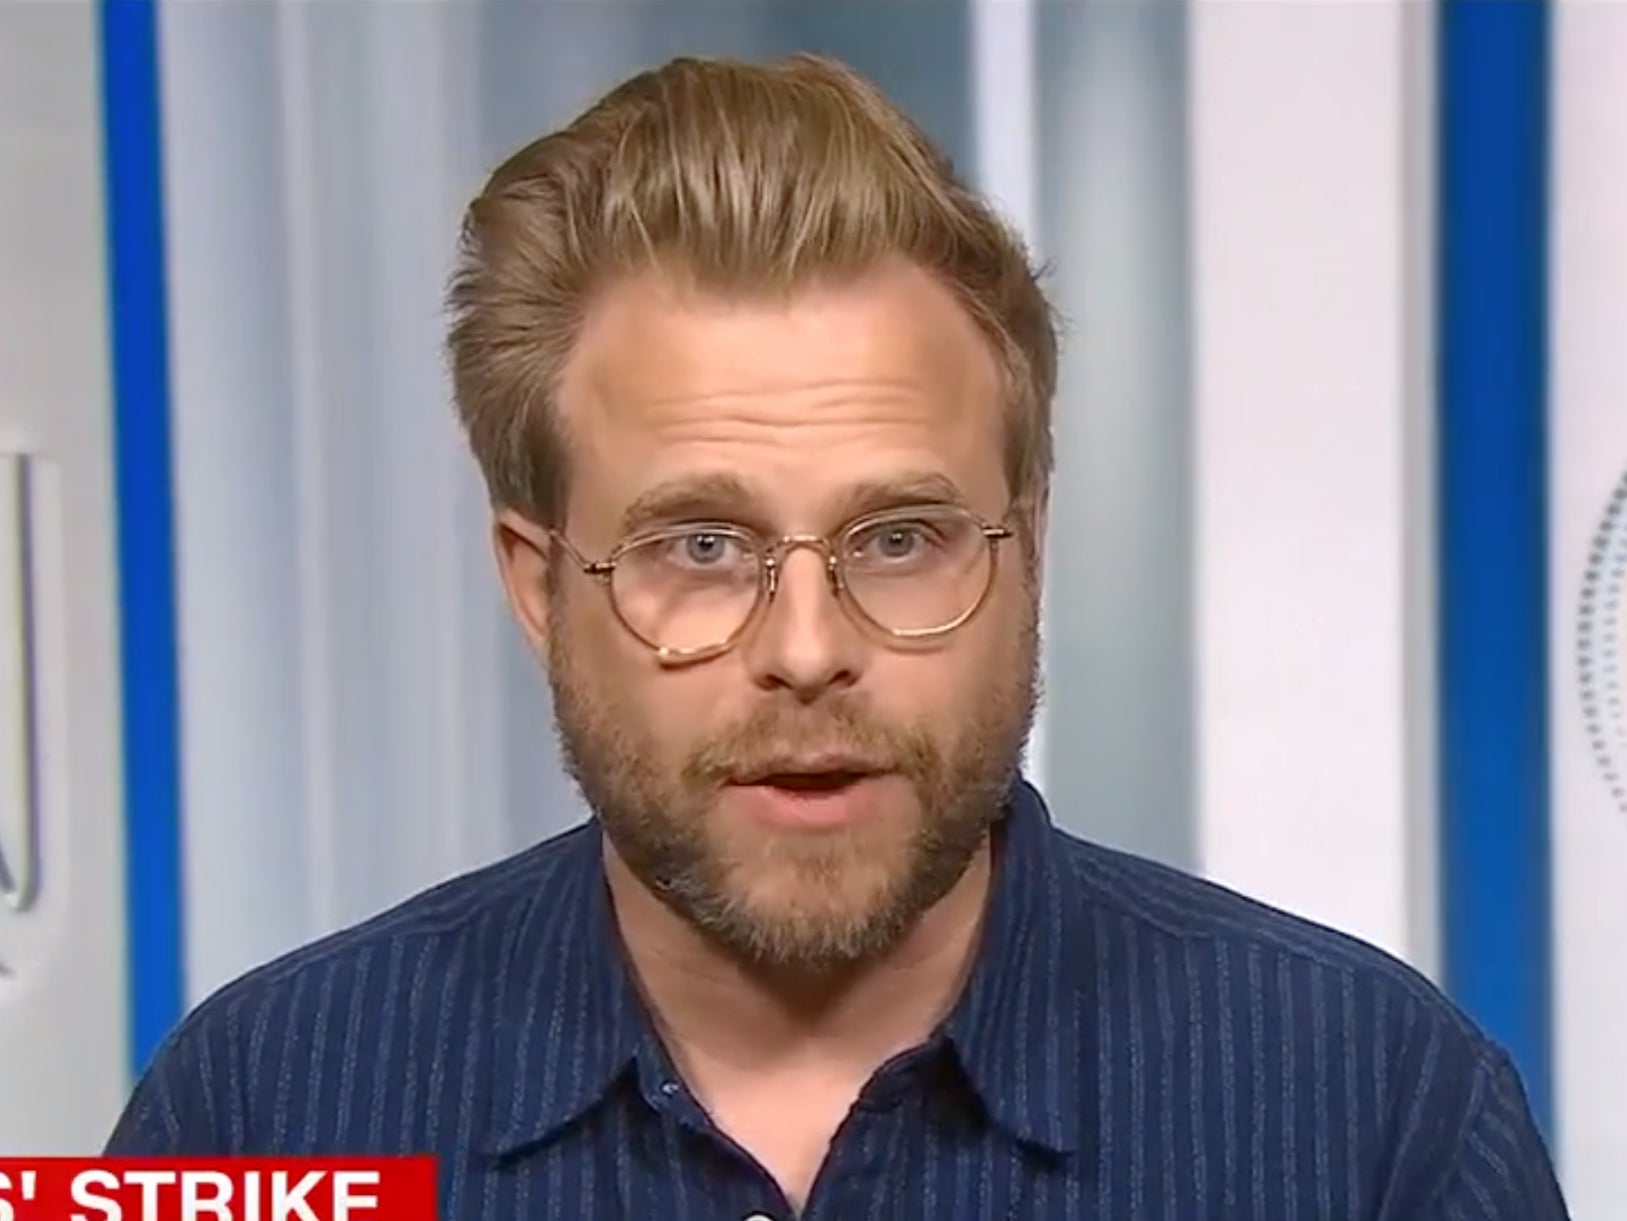 WGA writer and host of ‘Adam Ruins Everything’ Adam Conover discusses the writer’s strike during a segment on CNN